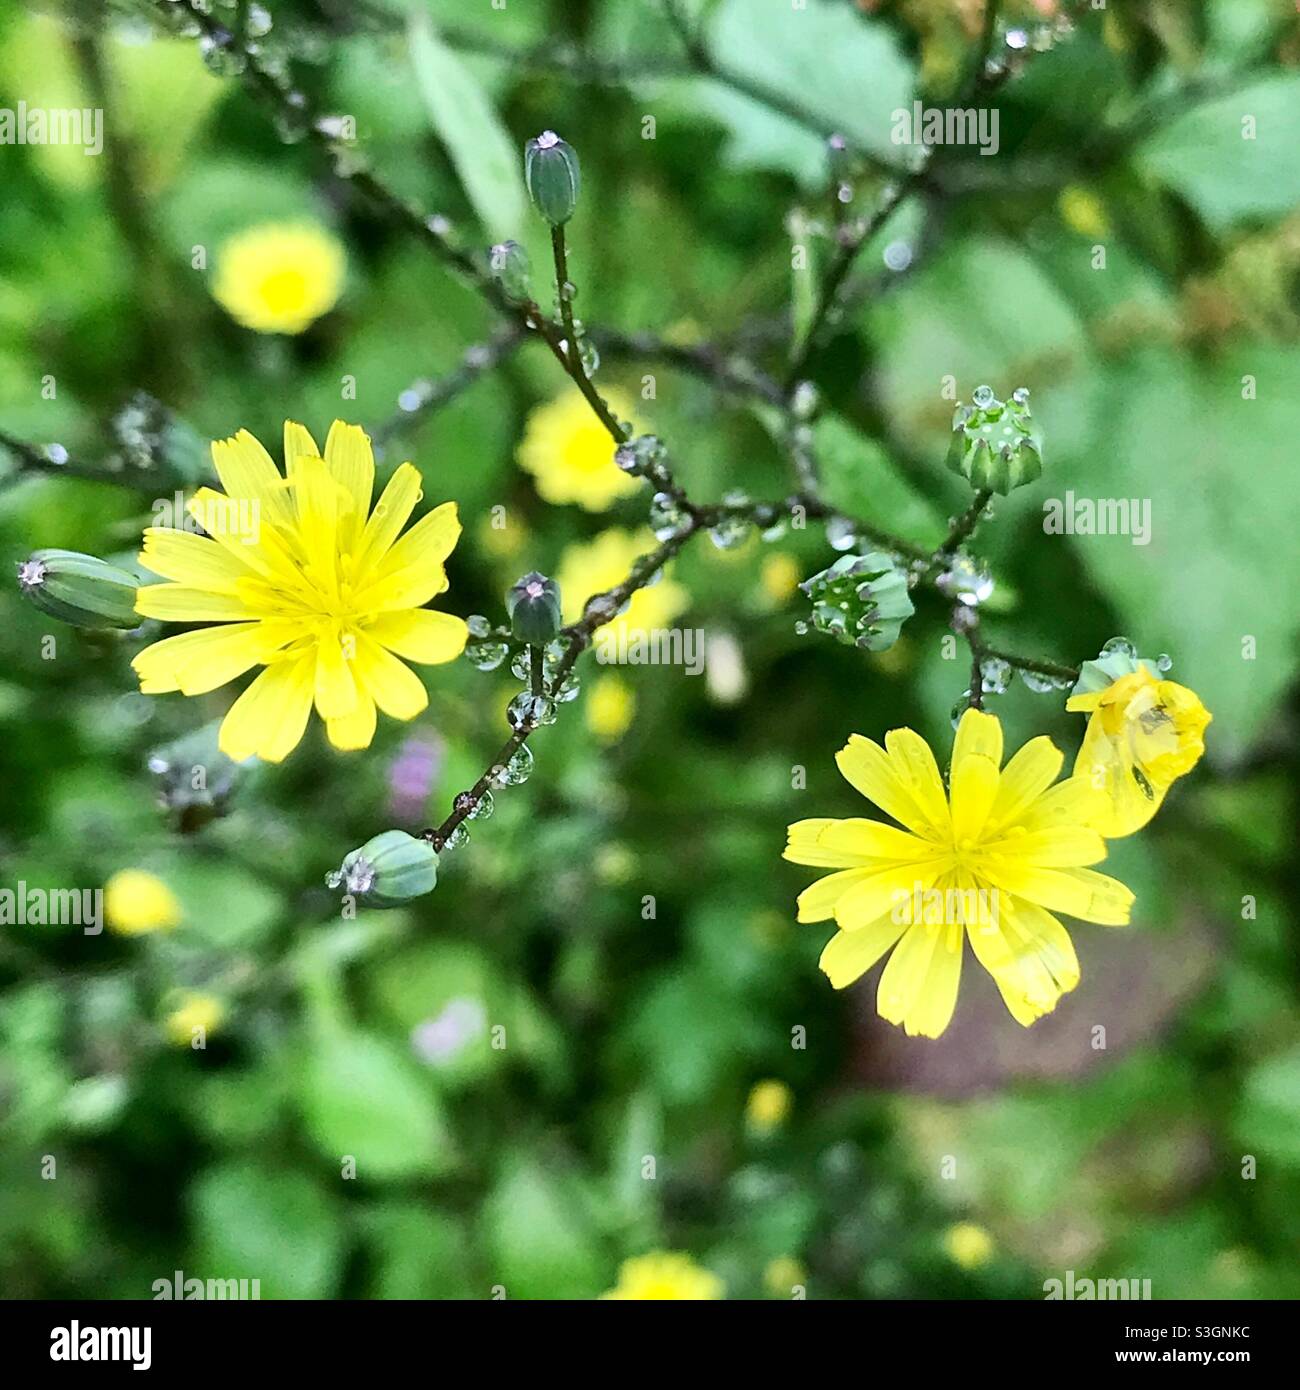 The delicate flowers of the common Nipplewort plant. Stock Photo